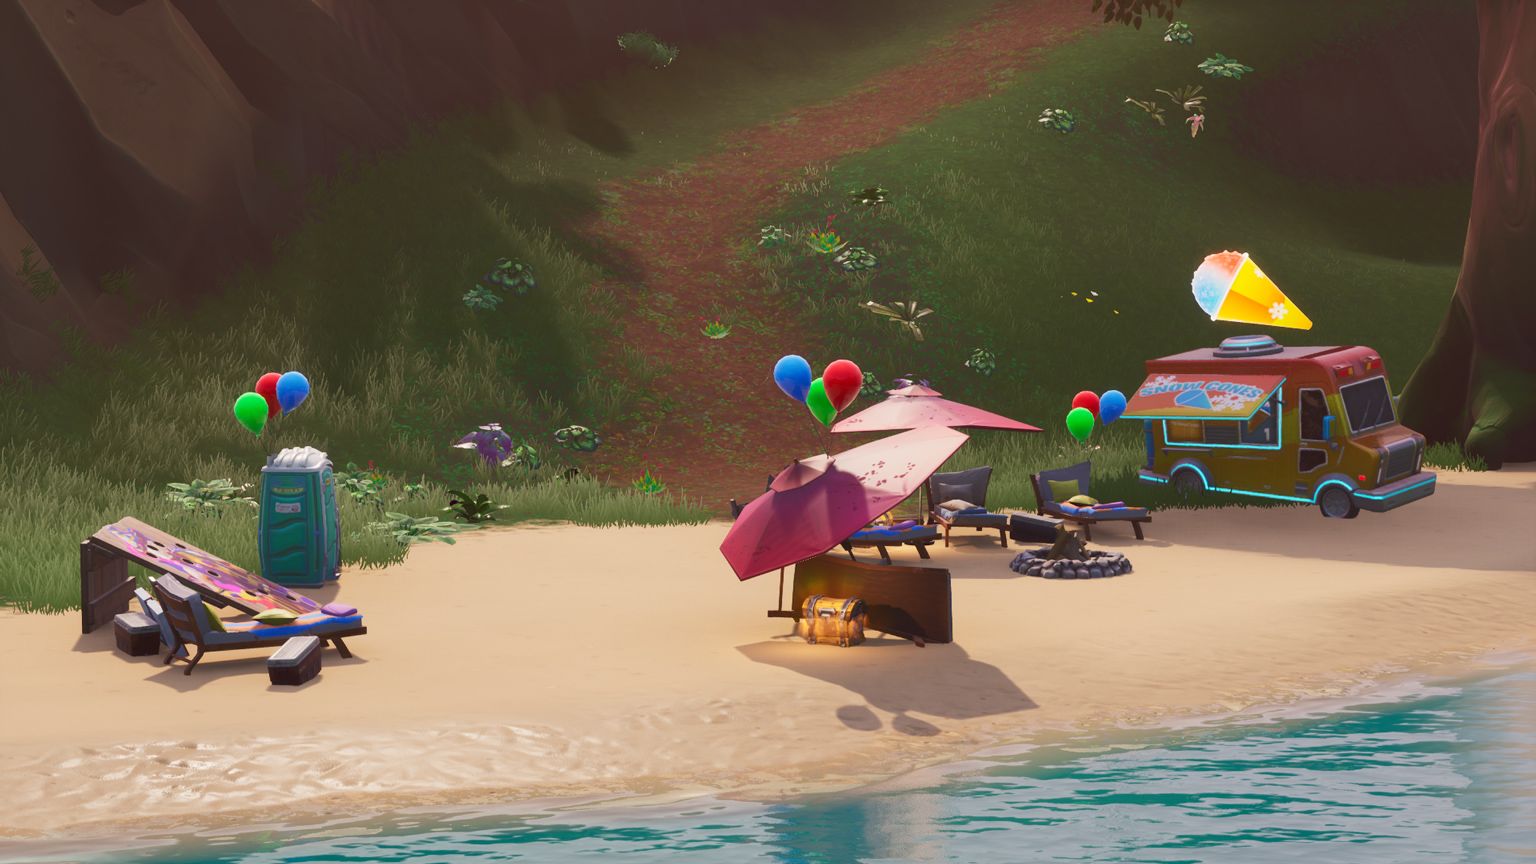 Fortnite 14 Days Of Summer Dance At Different Beach Parties Location Guide Fortnite News